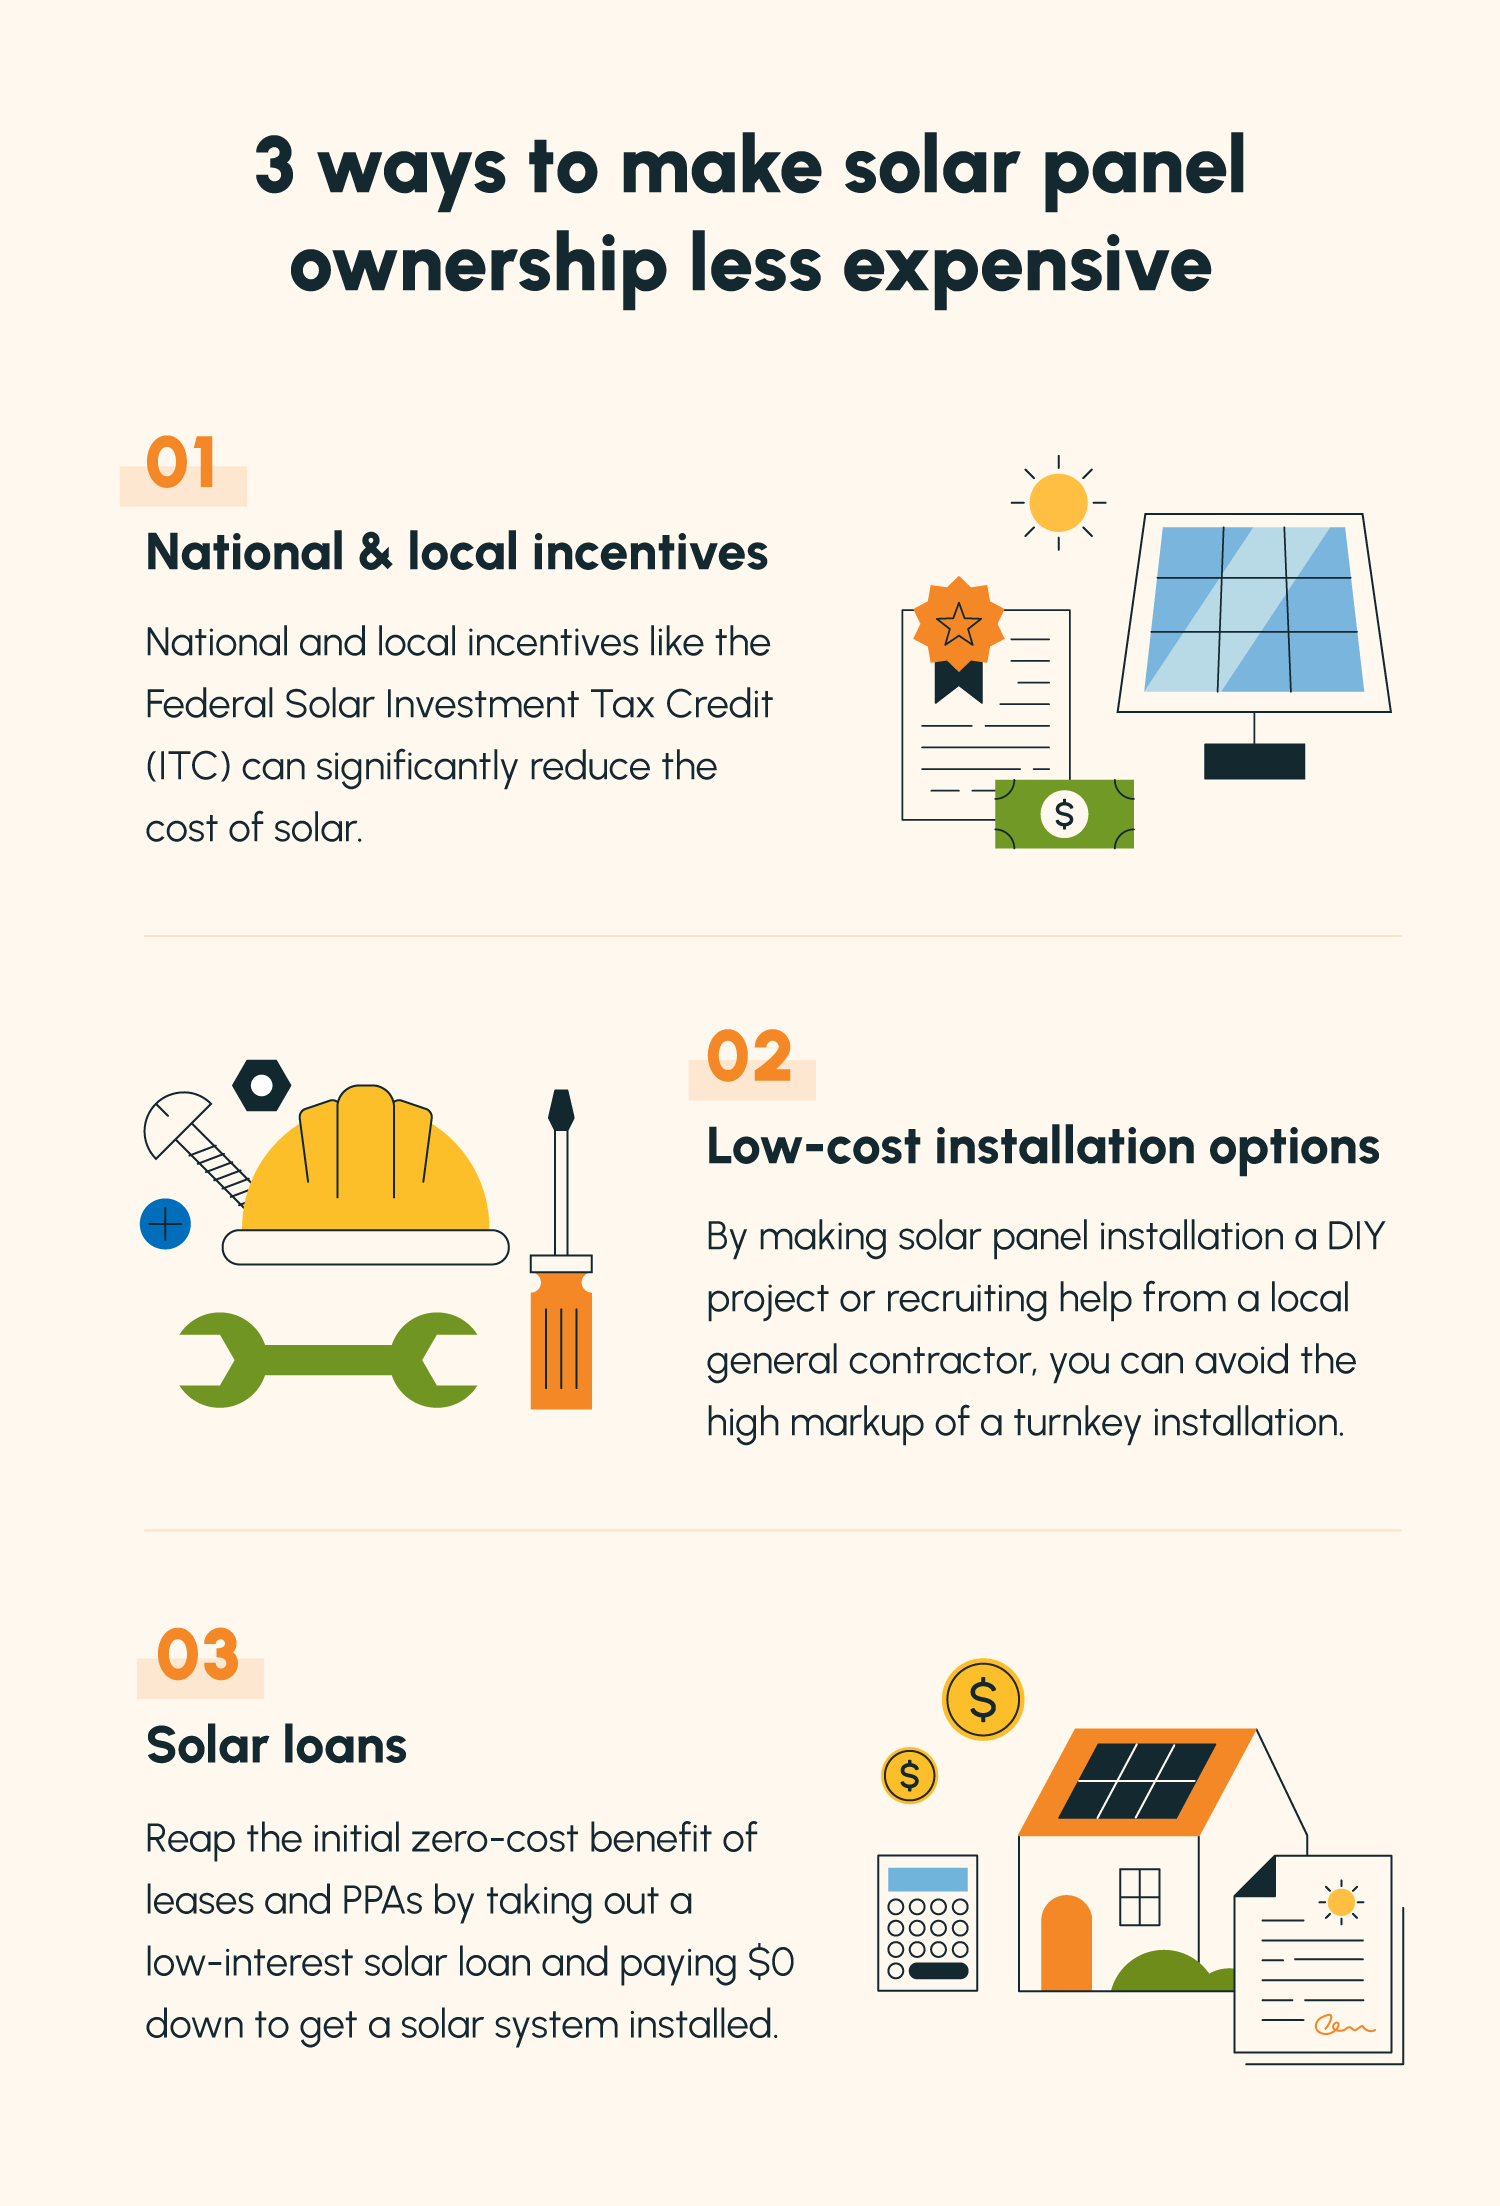 A list of three ways to reduce the cost of solar panel ownership, accompanied by illustrations